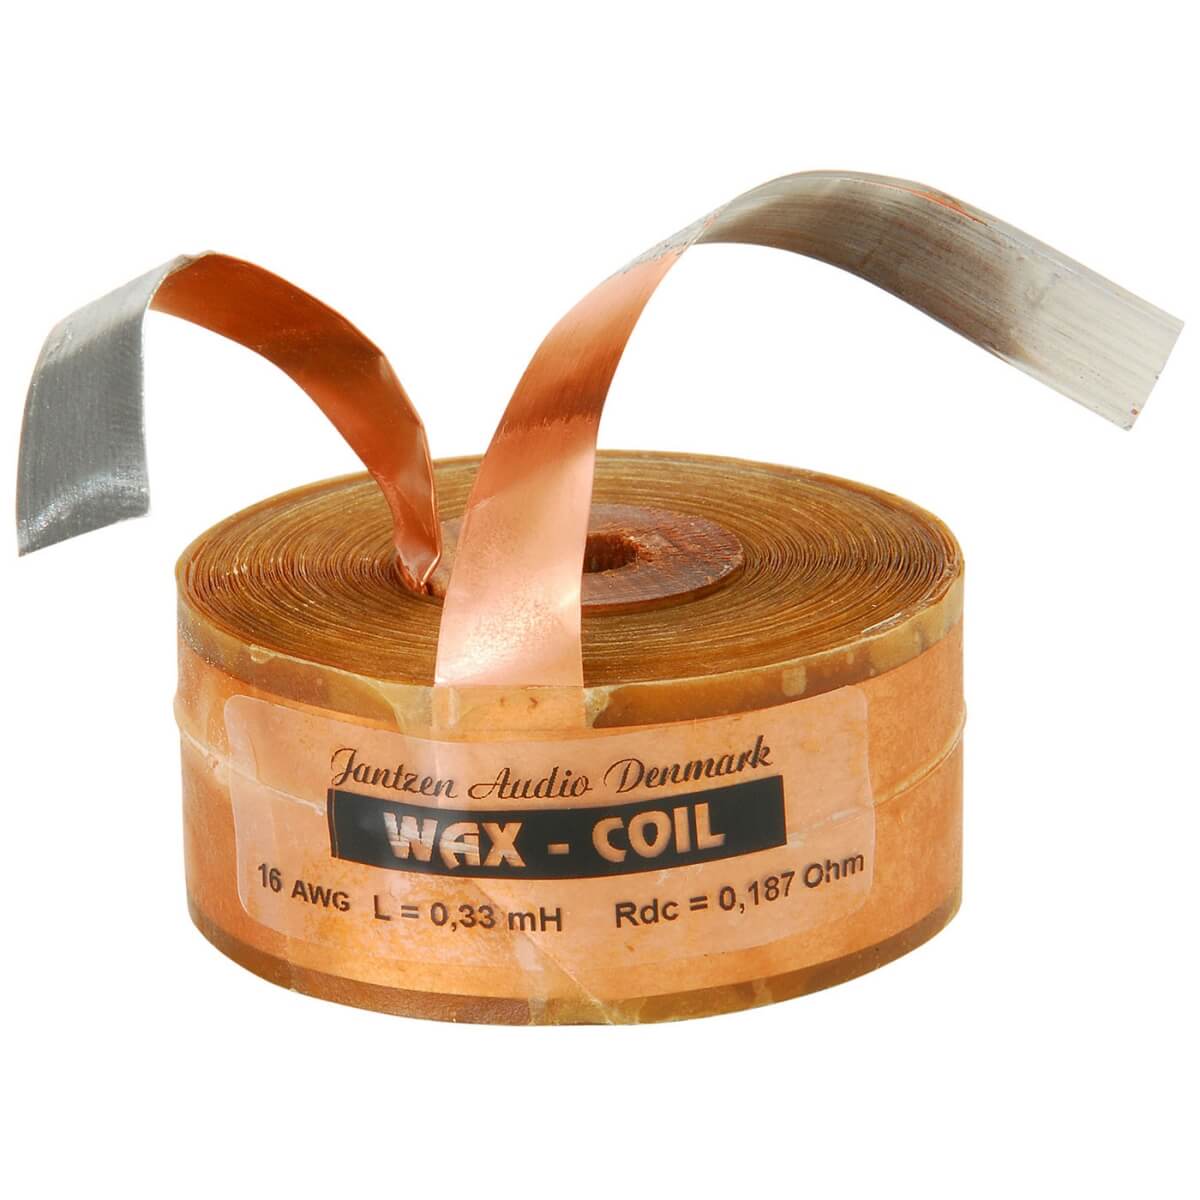 JANTZEN AUDIO WAX COIL Waxed Taped Coil 12AWG 6mH